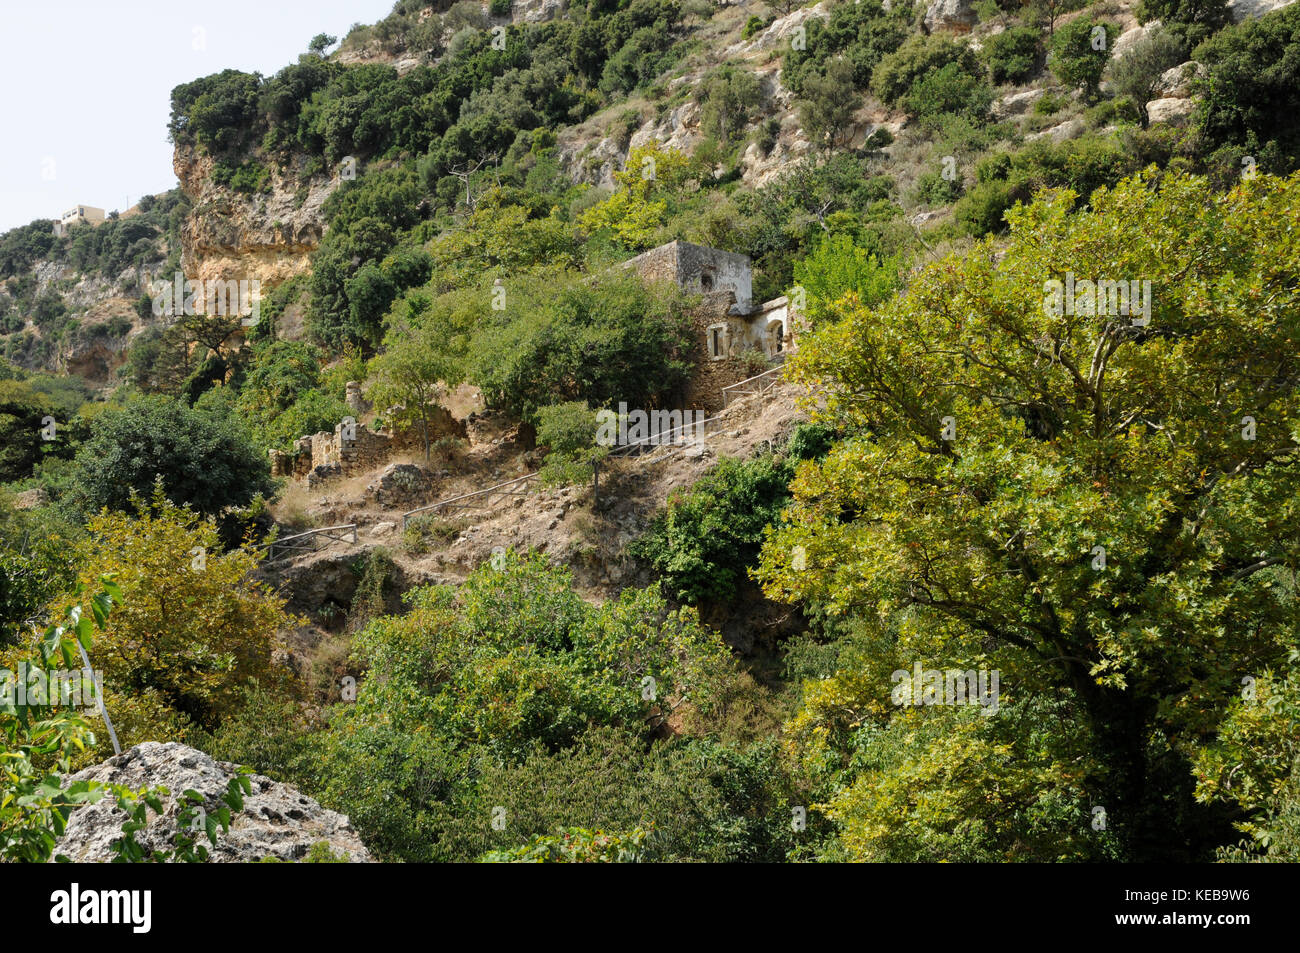 The Mili Gorge near Rethymno in Northern Crete provides a pleasant walk through a landscape of abandoned villages and. water mills. Stock Photo